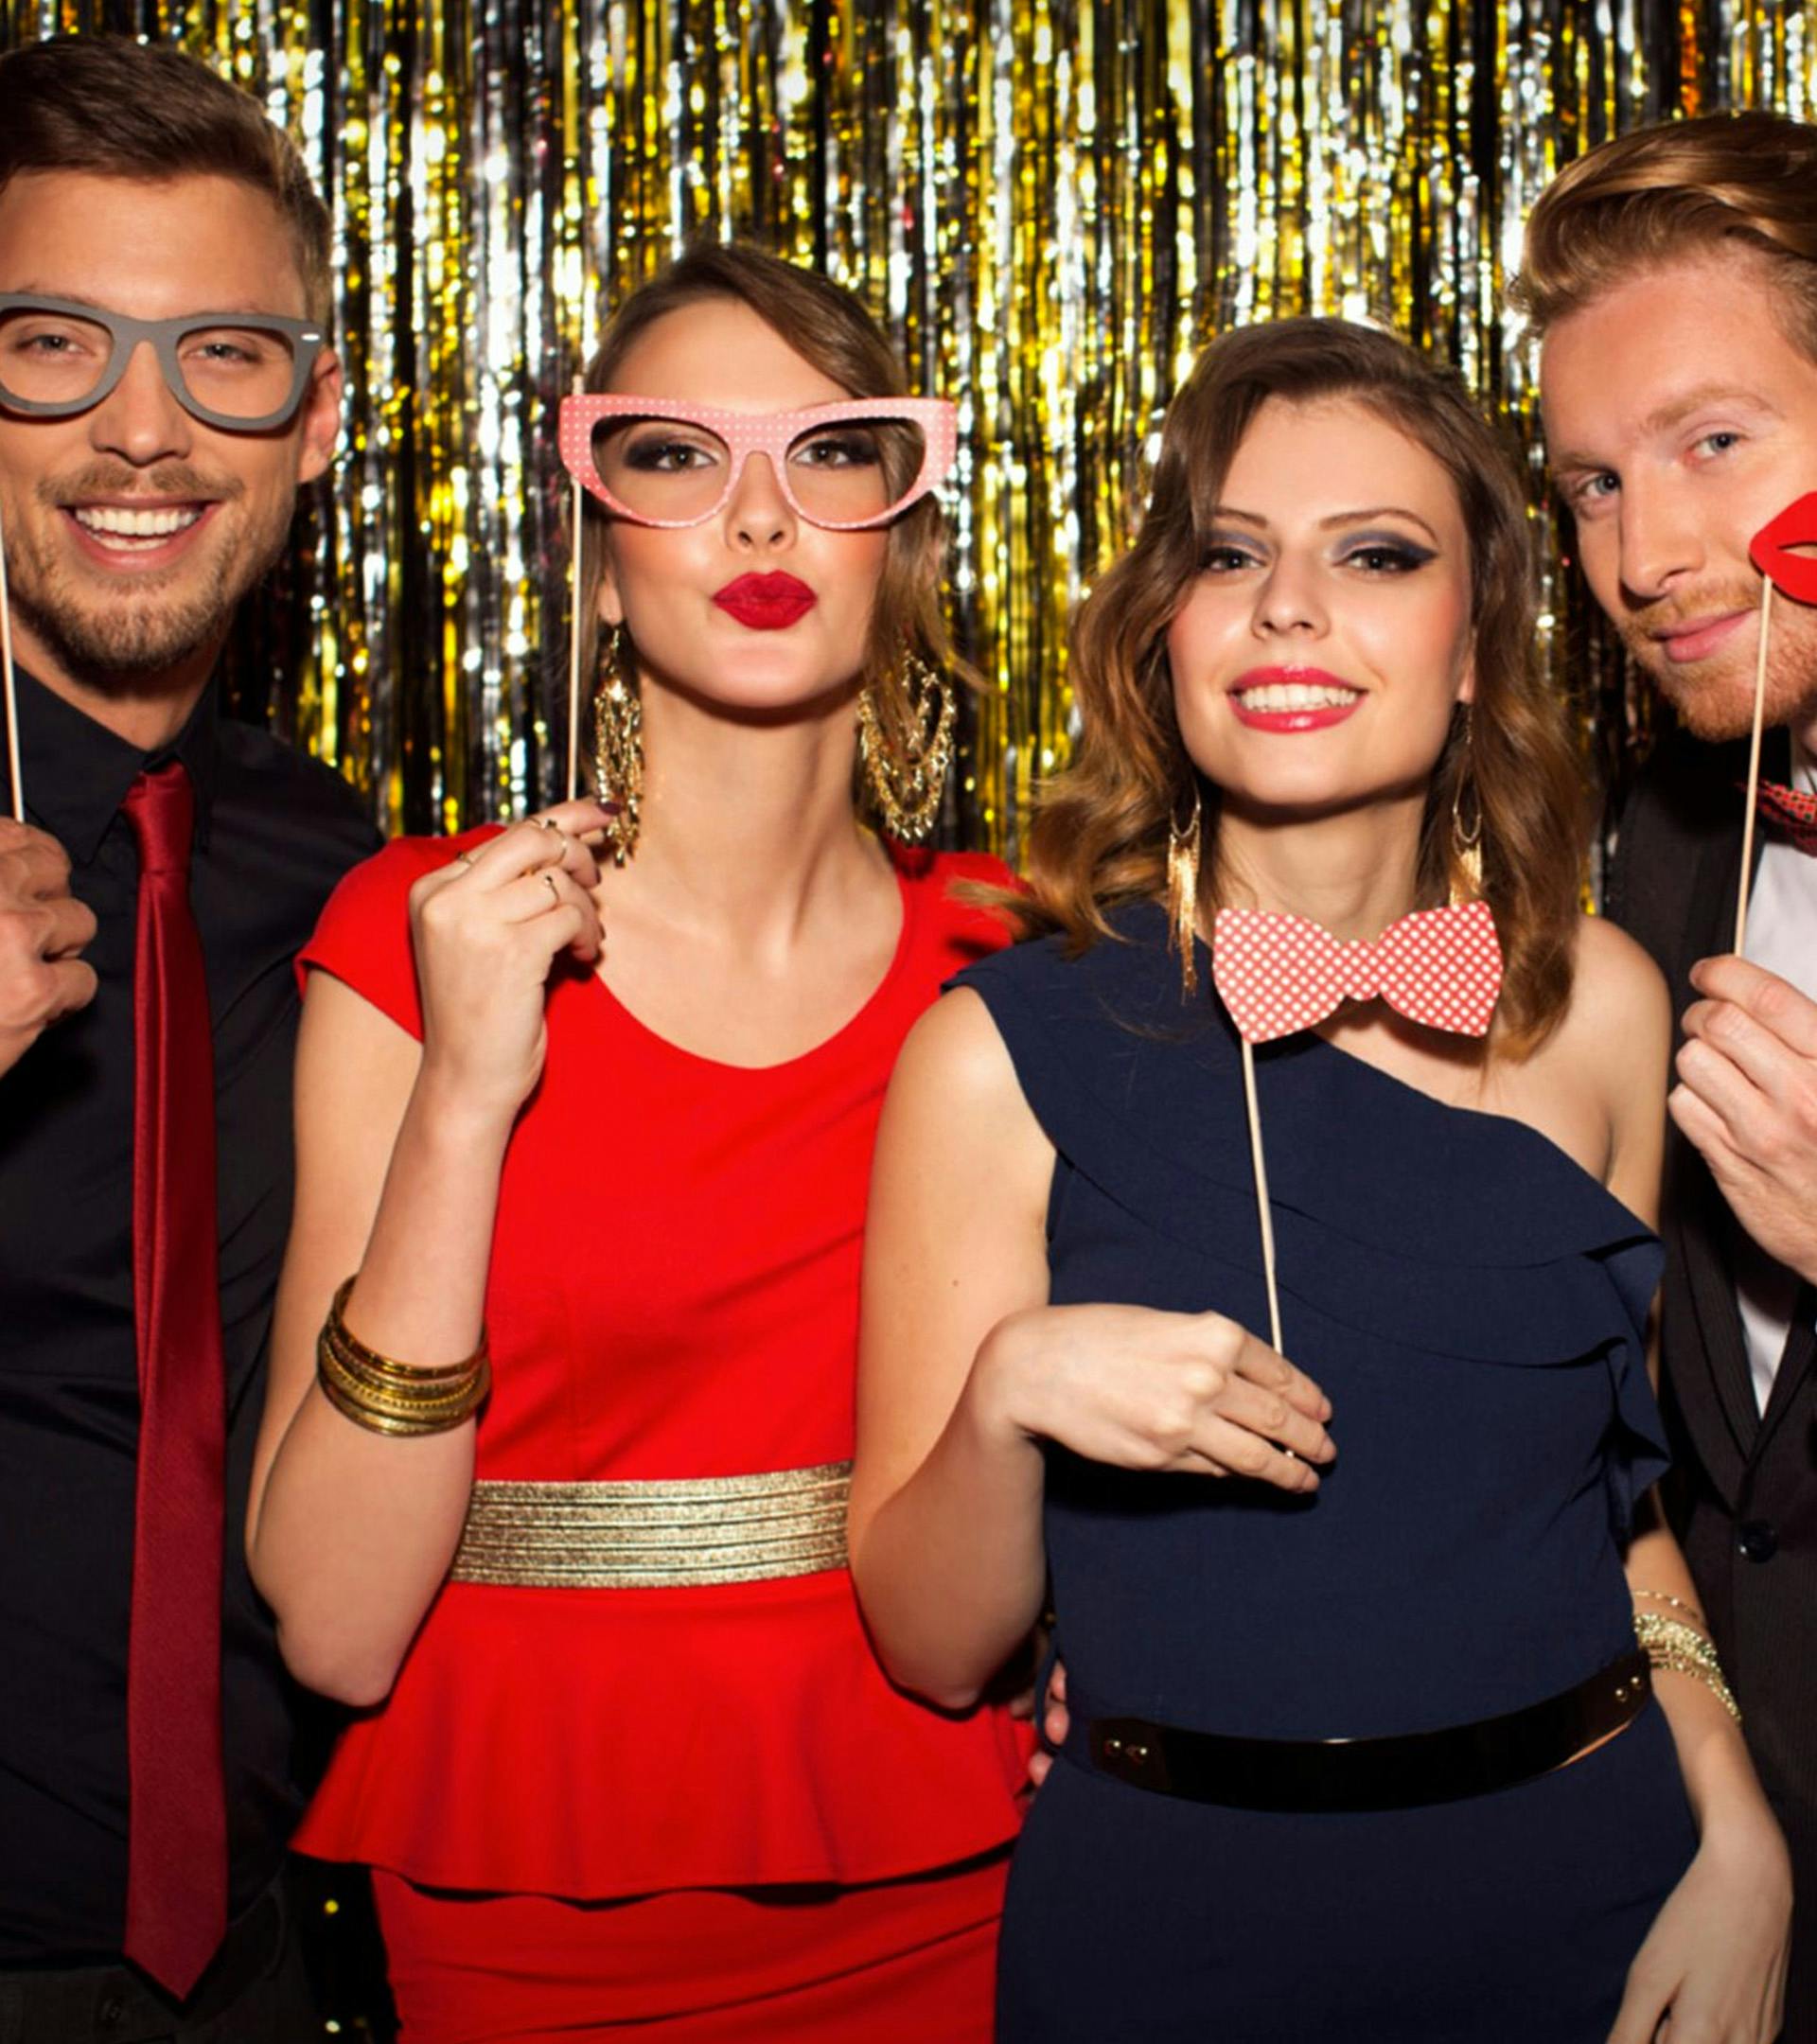 Group of people with glasses, lips, and bow tie props taking a picture